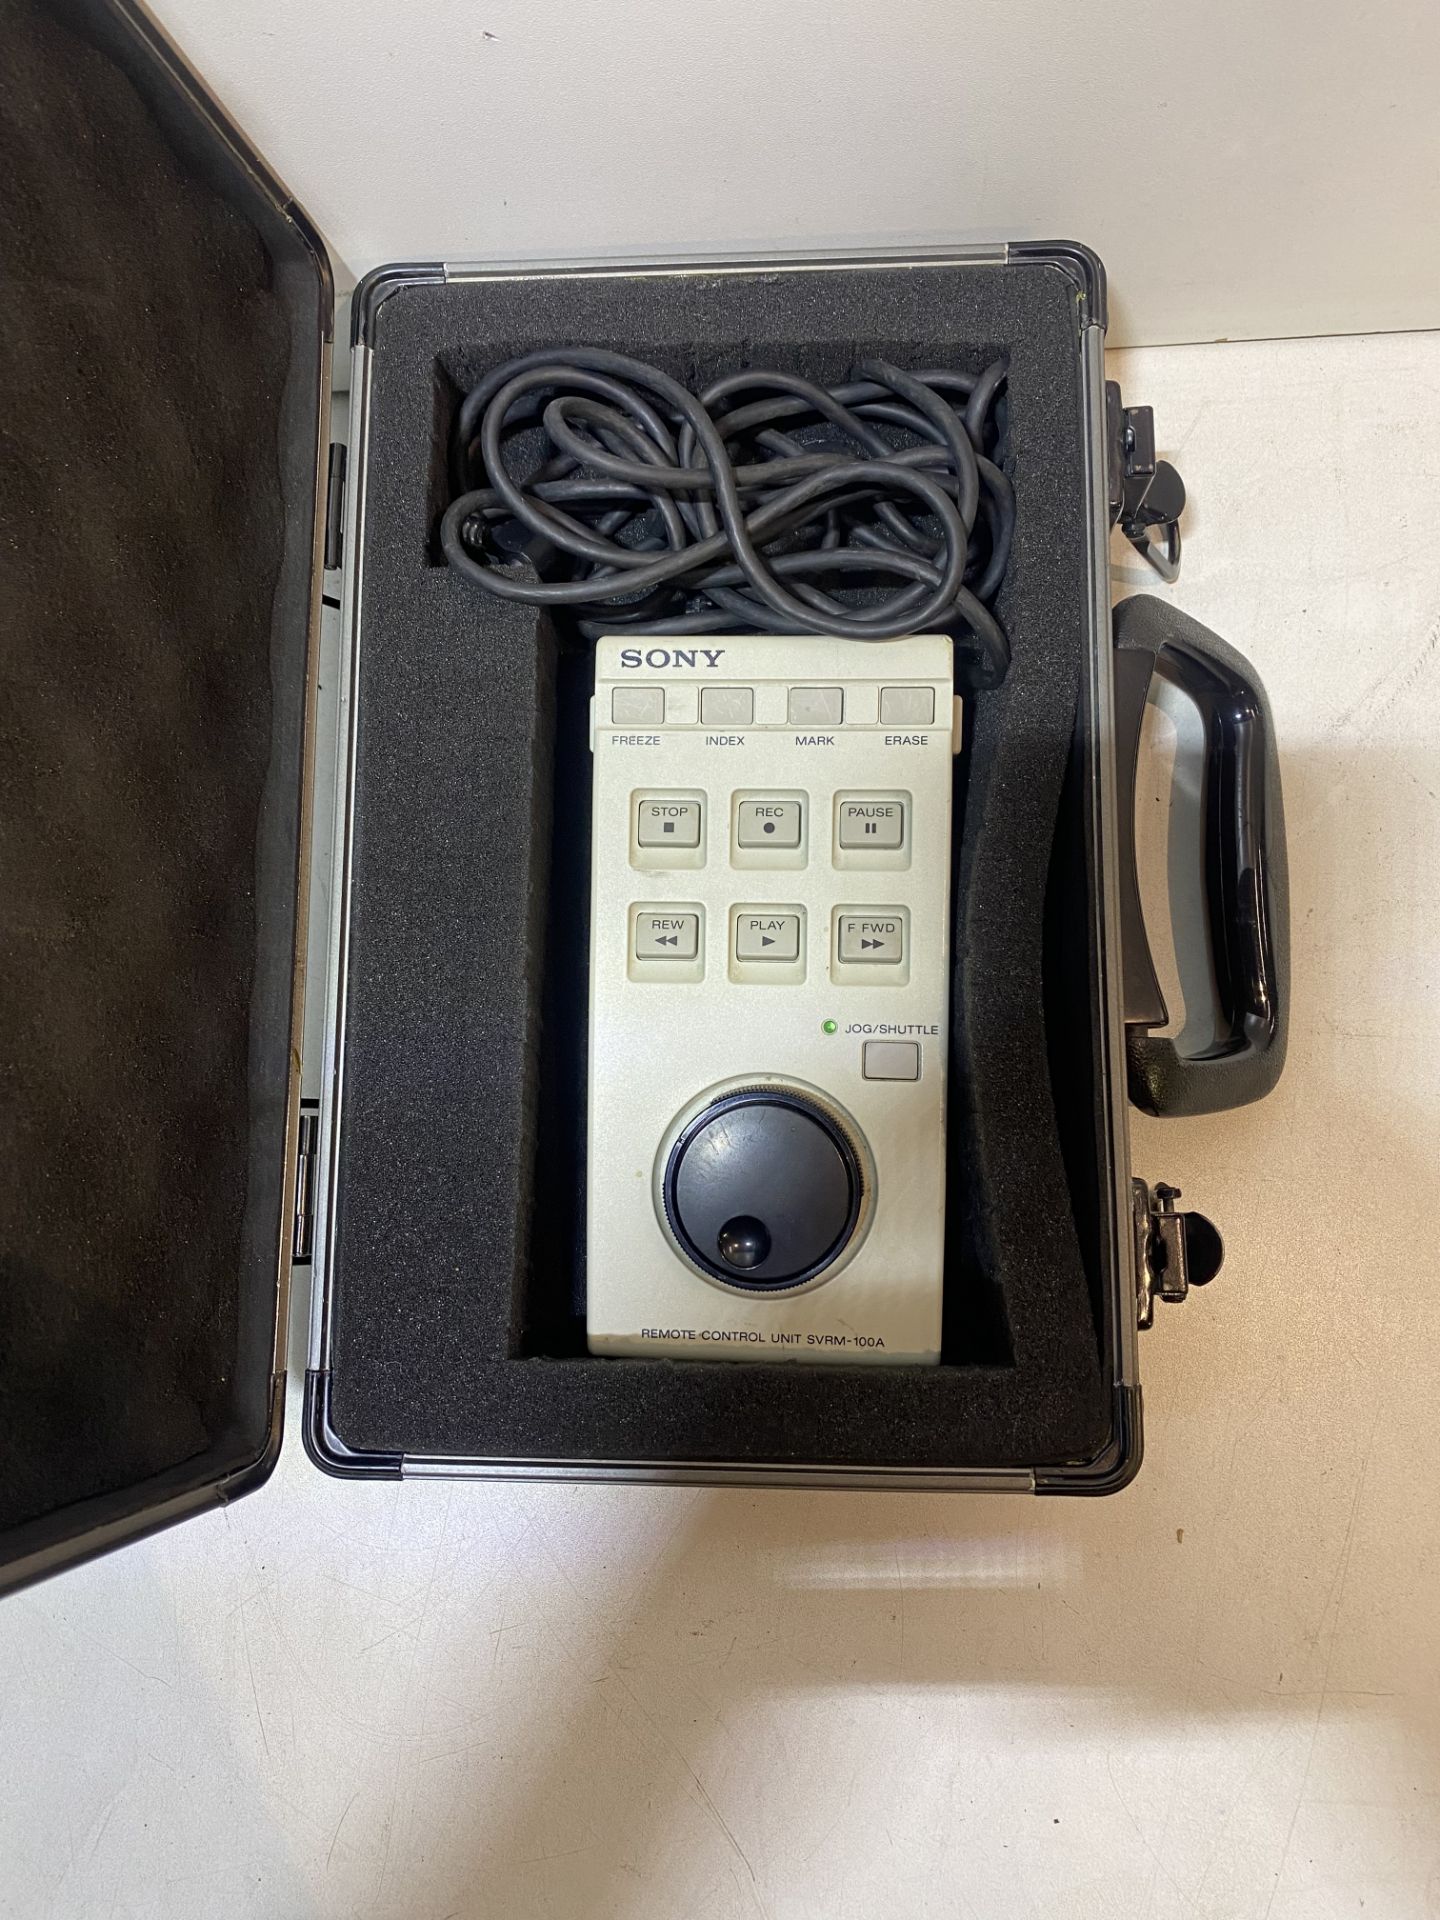 Sony SVRM-100A Wired Remote Control Unit w/ Carry Case - Image 5 of 7